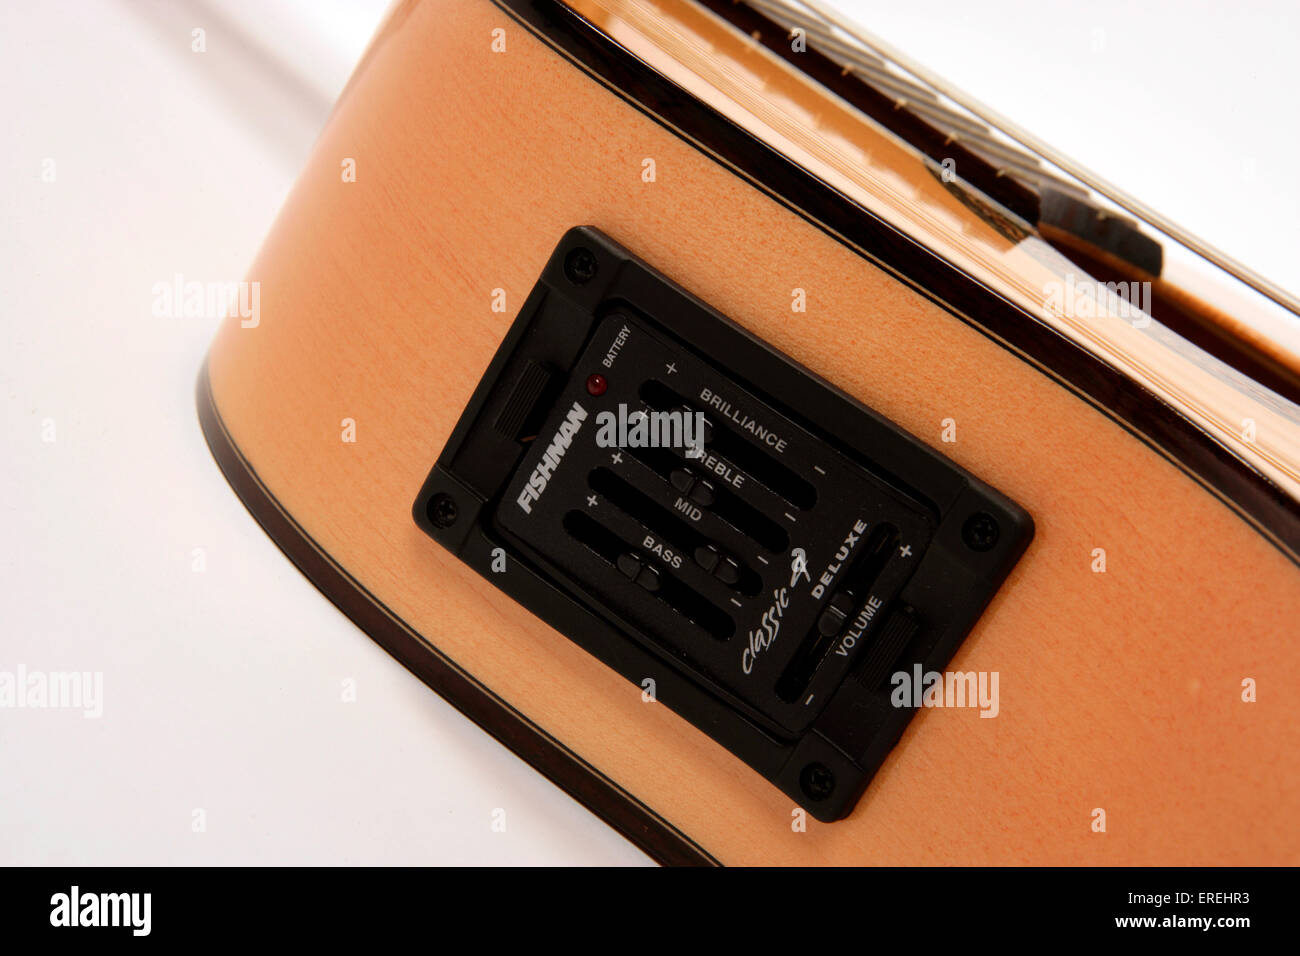 Fishman pick up controls on an elctro acoustic guitar Stock Photo